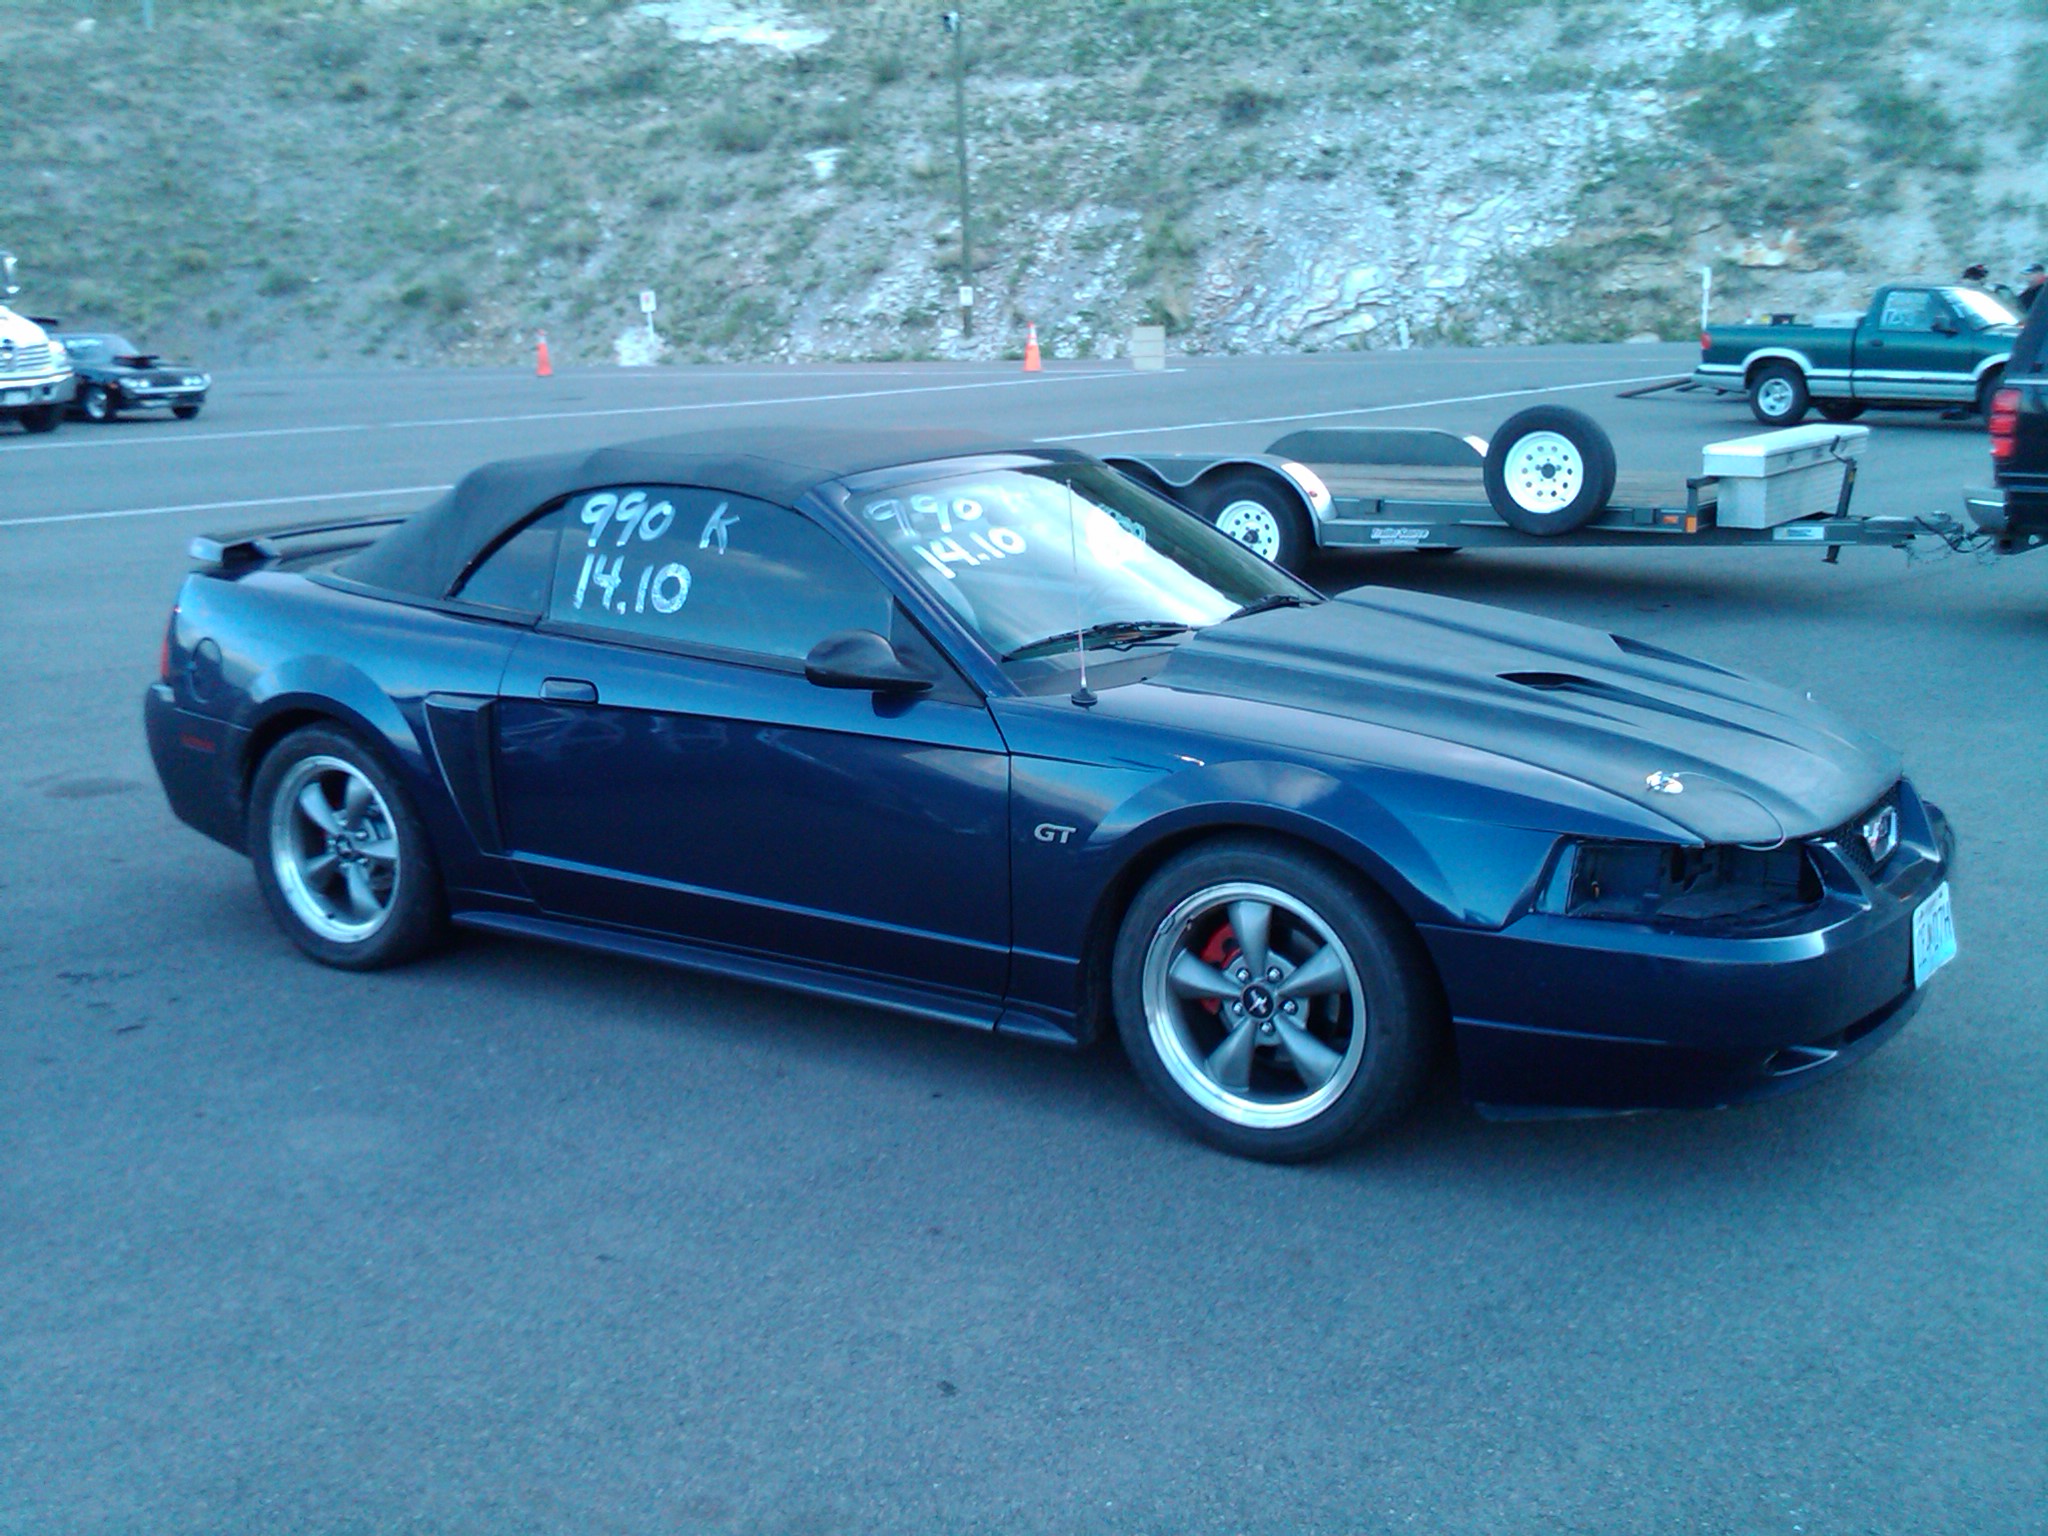 2003 Ford mustang gt quarter mile time #1